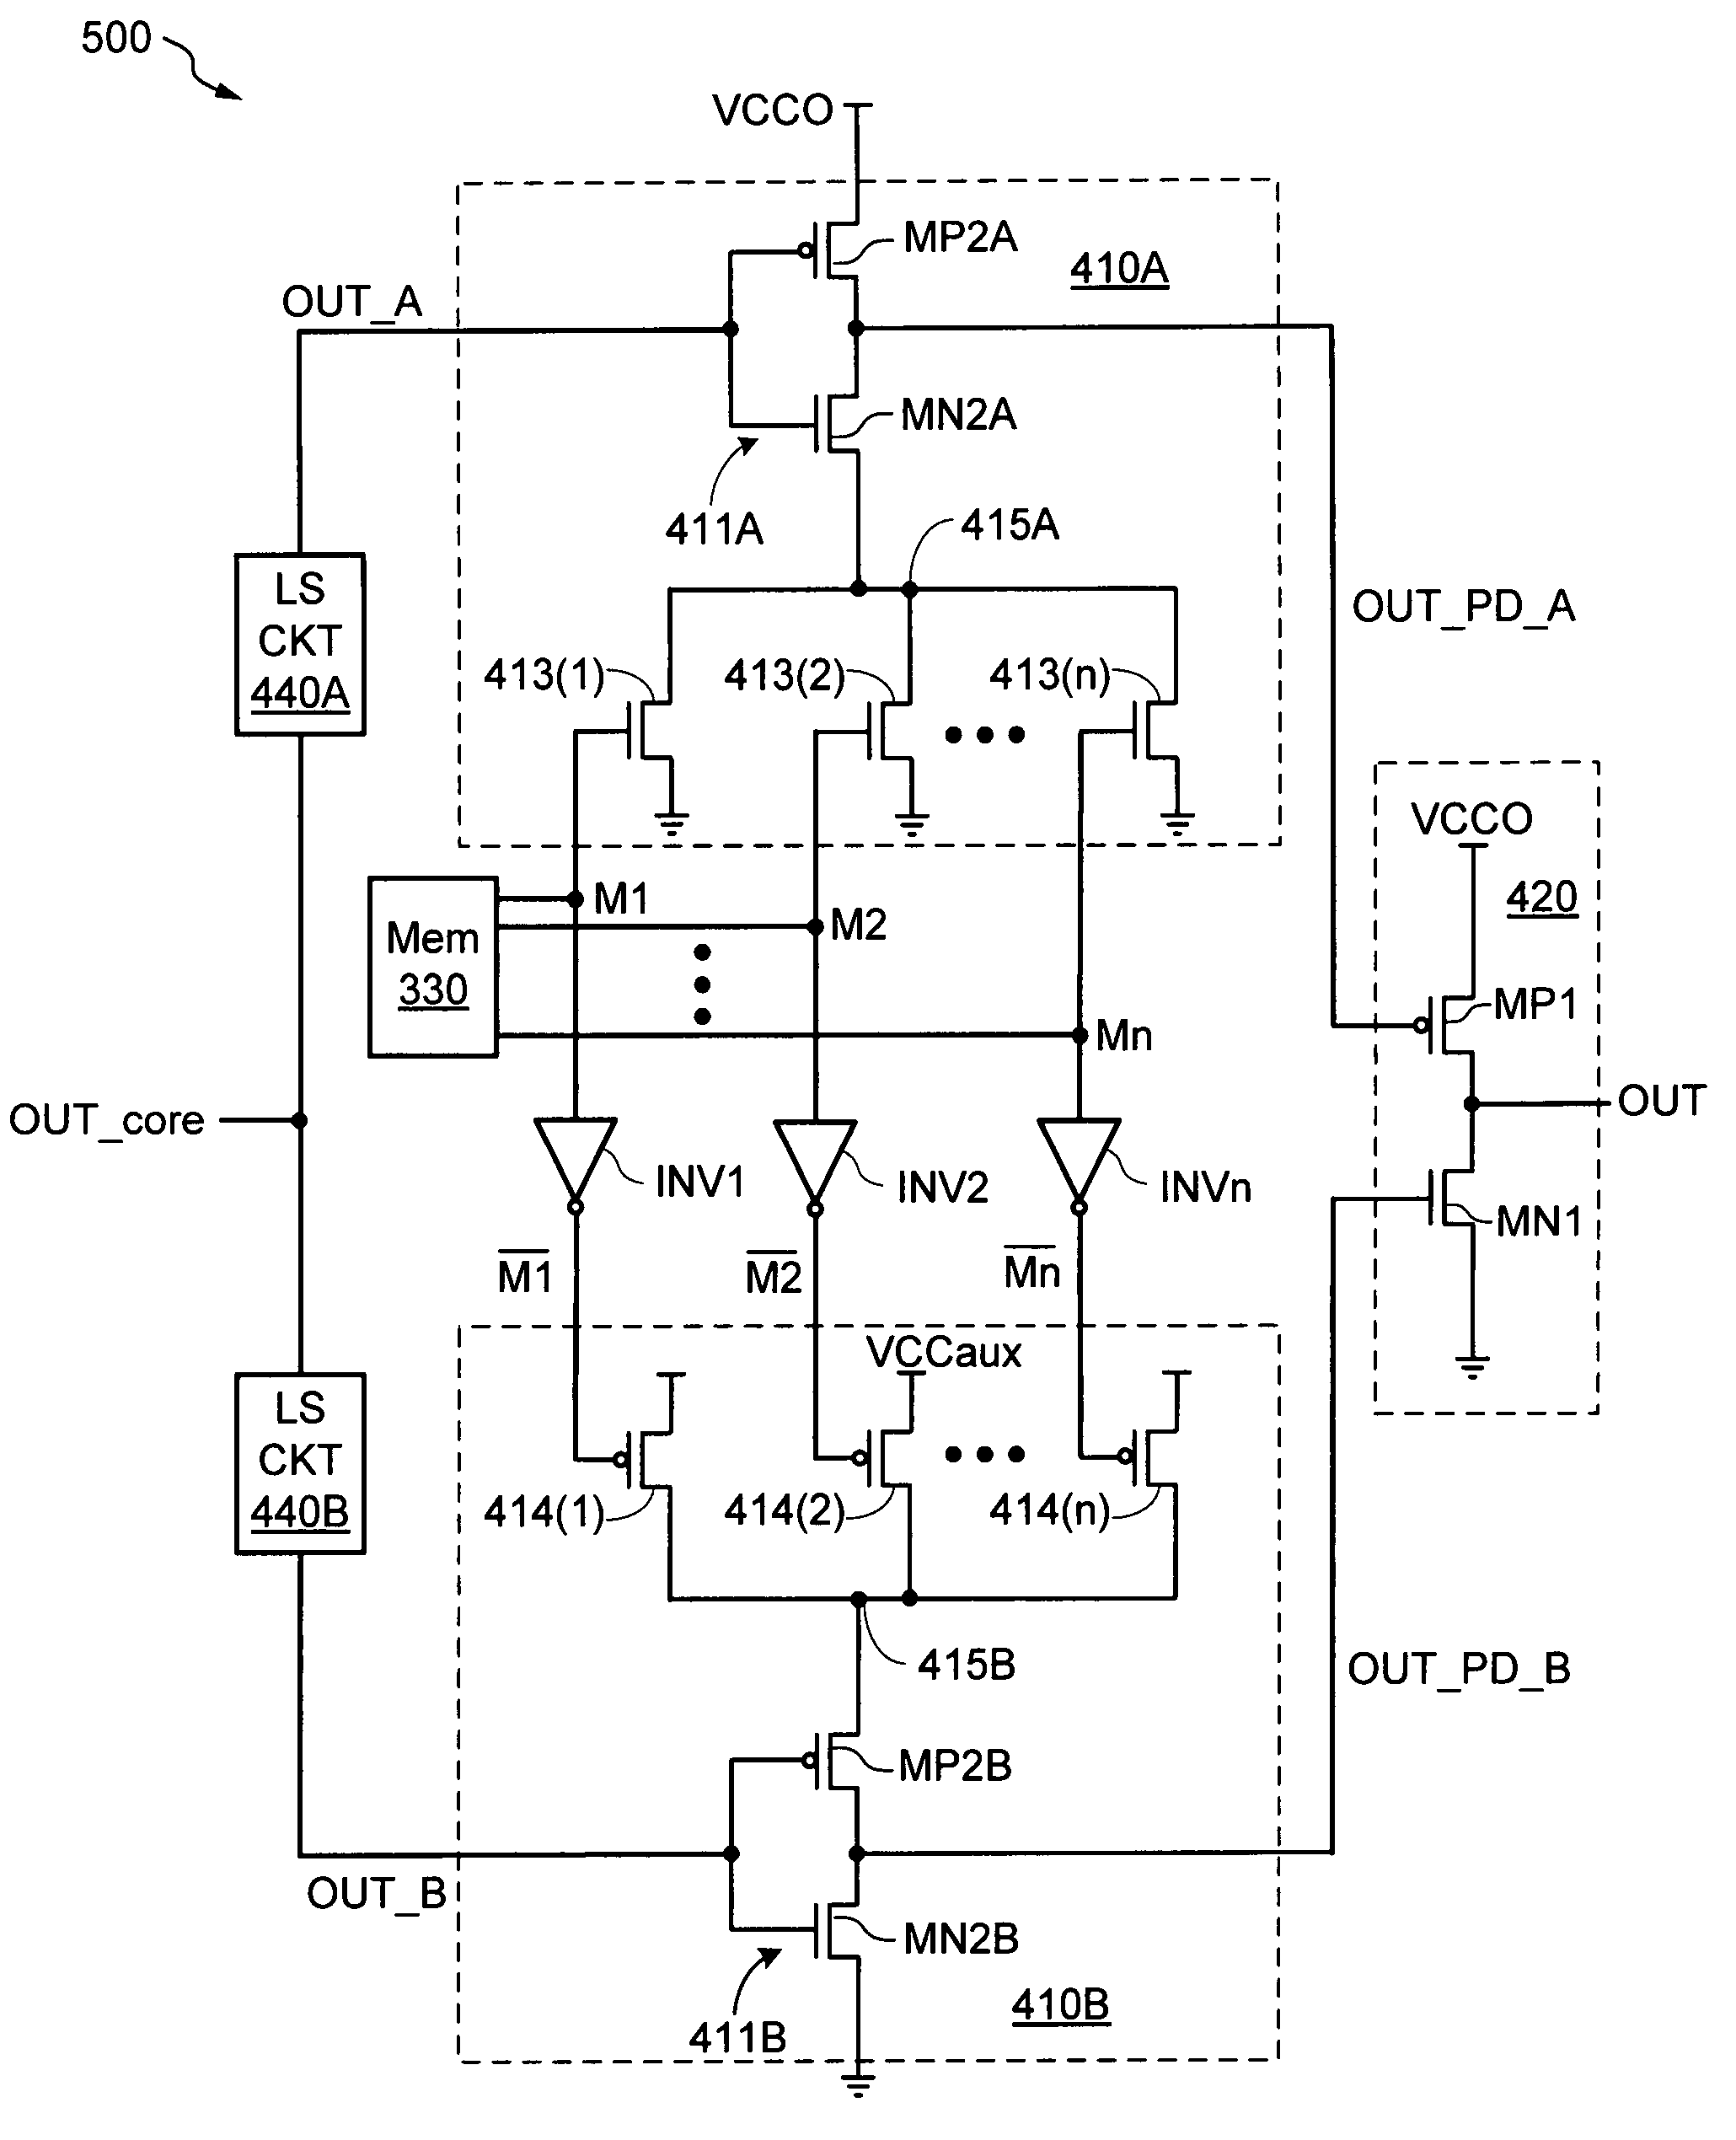 Slew rate control for output signals